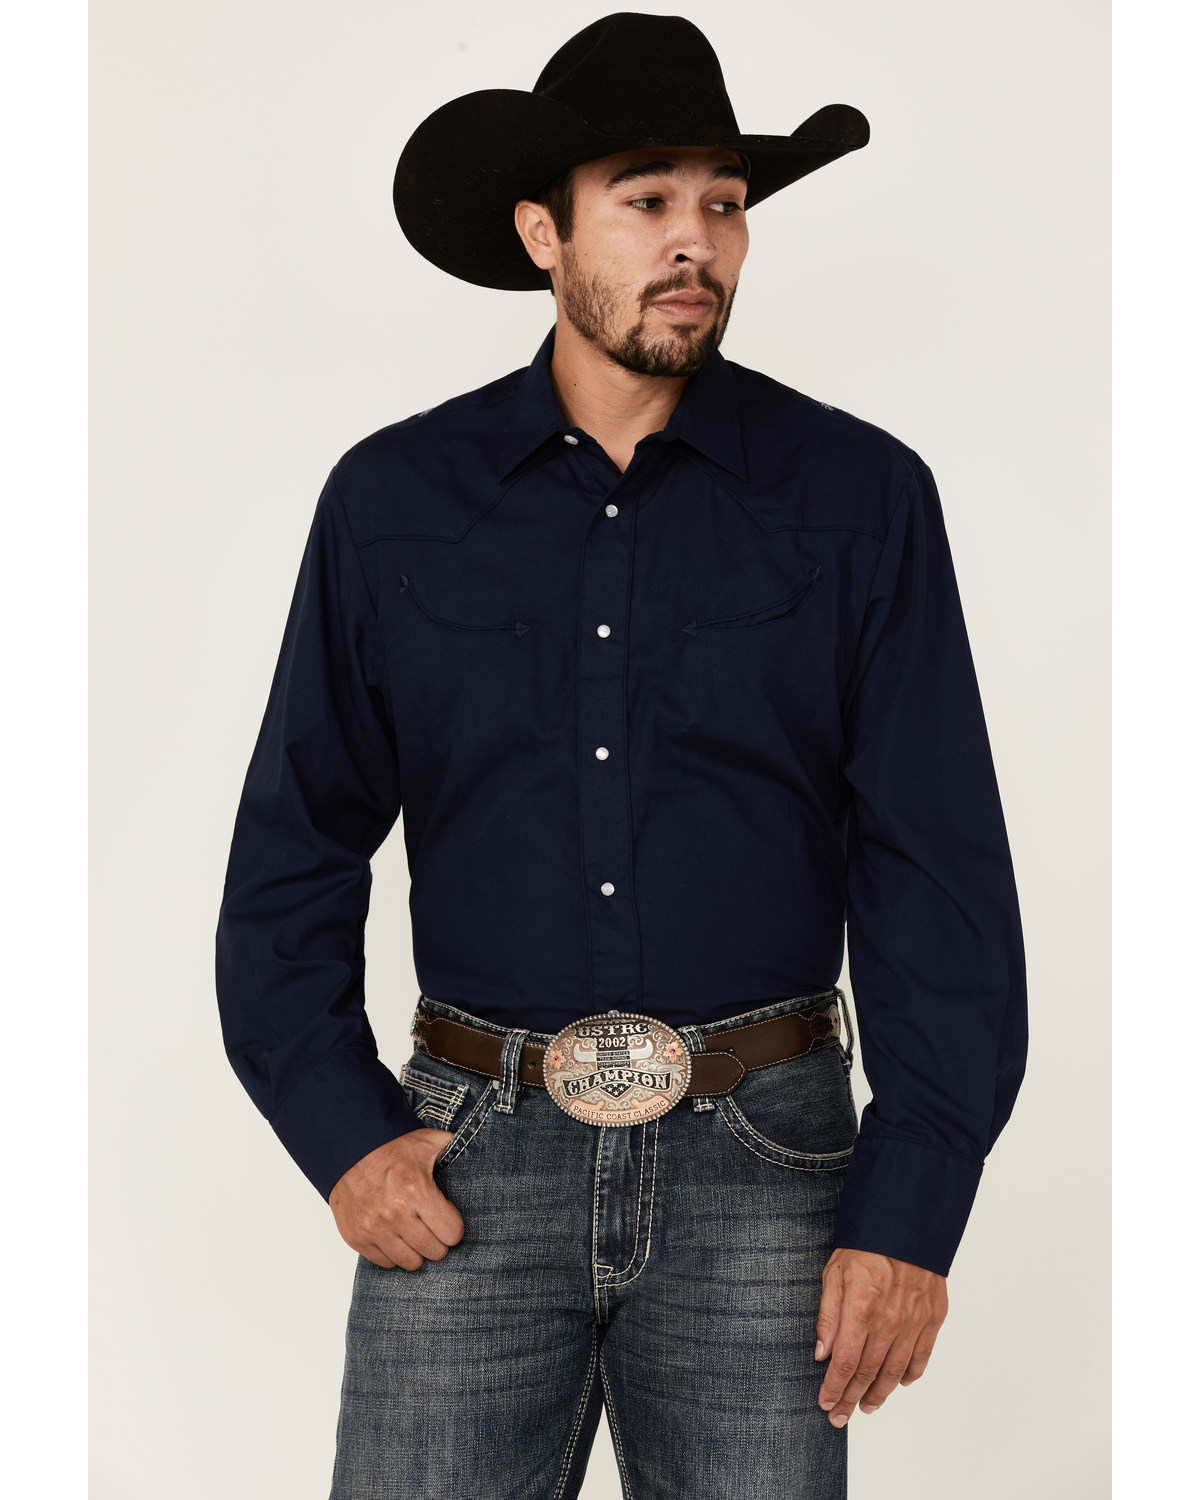 Roper Men's Solid Embroidered Yoke Long Sleeve Pearl Snap Western Shirt